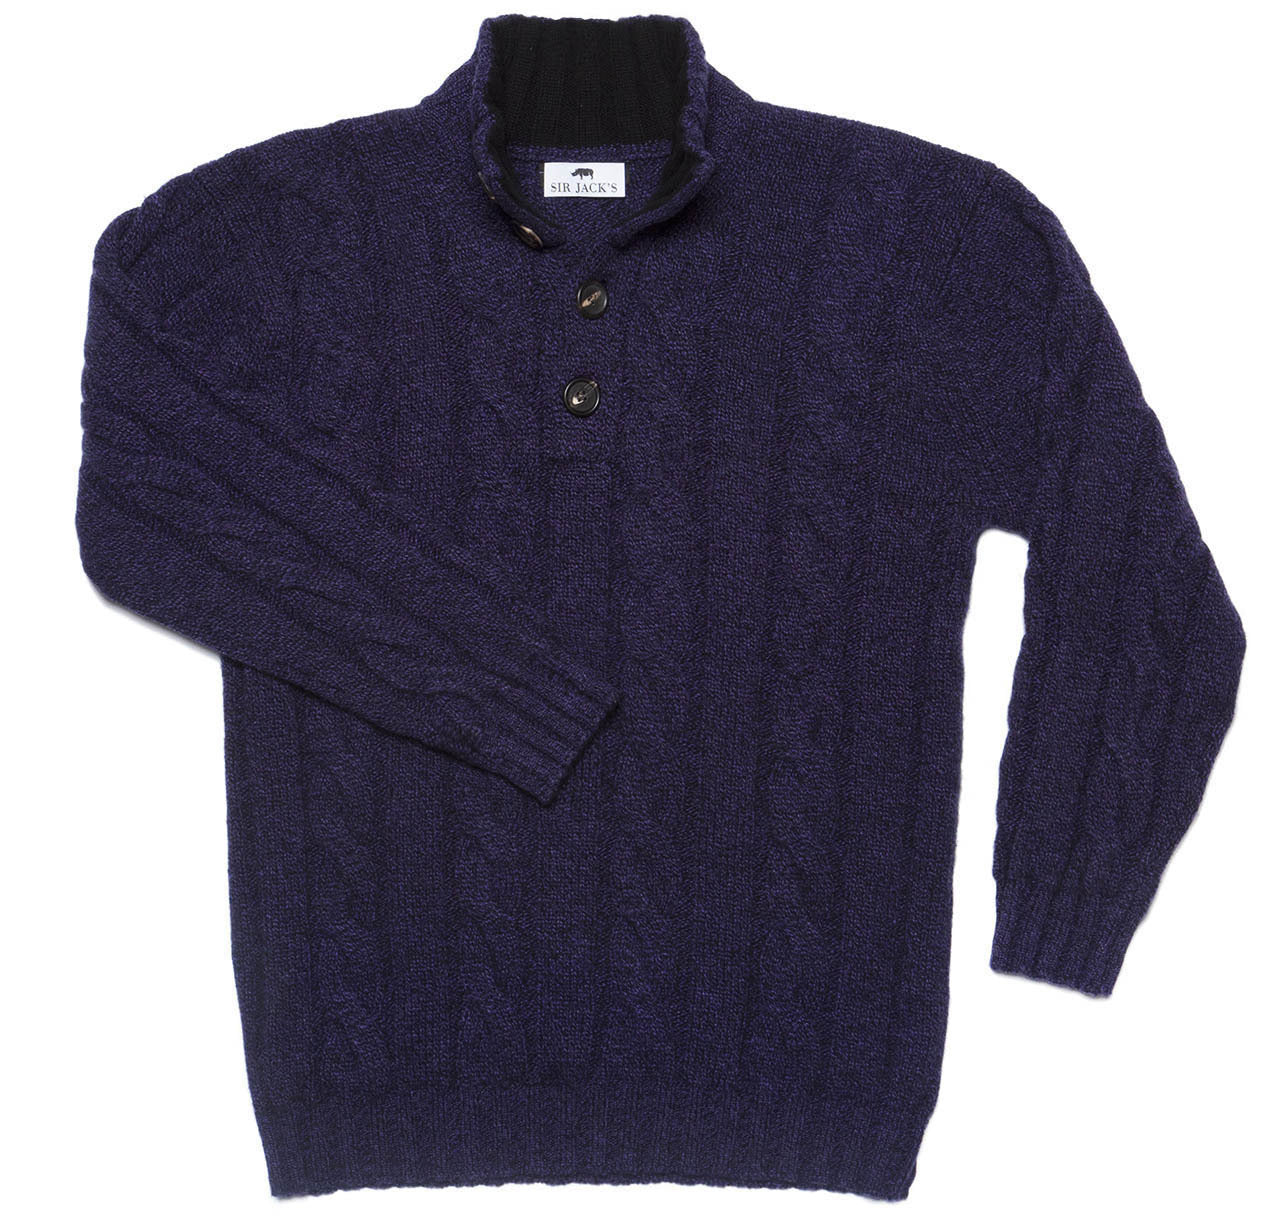 Sir Jack's Cashmere Cable Knit Mockneck Sweater in Dark Plum